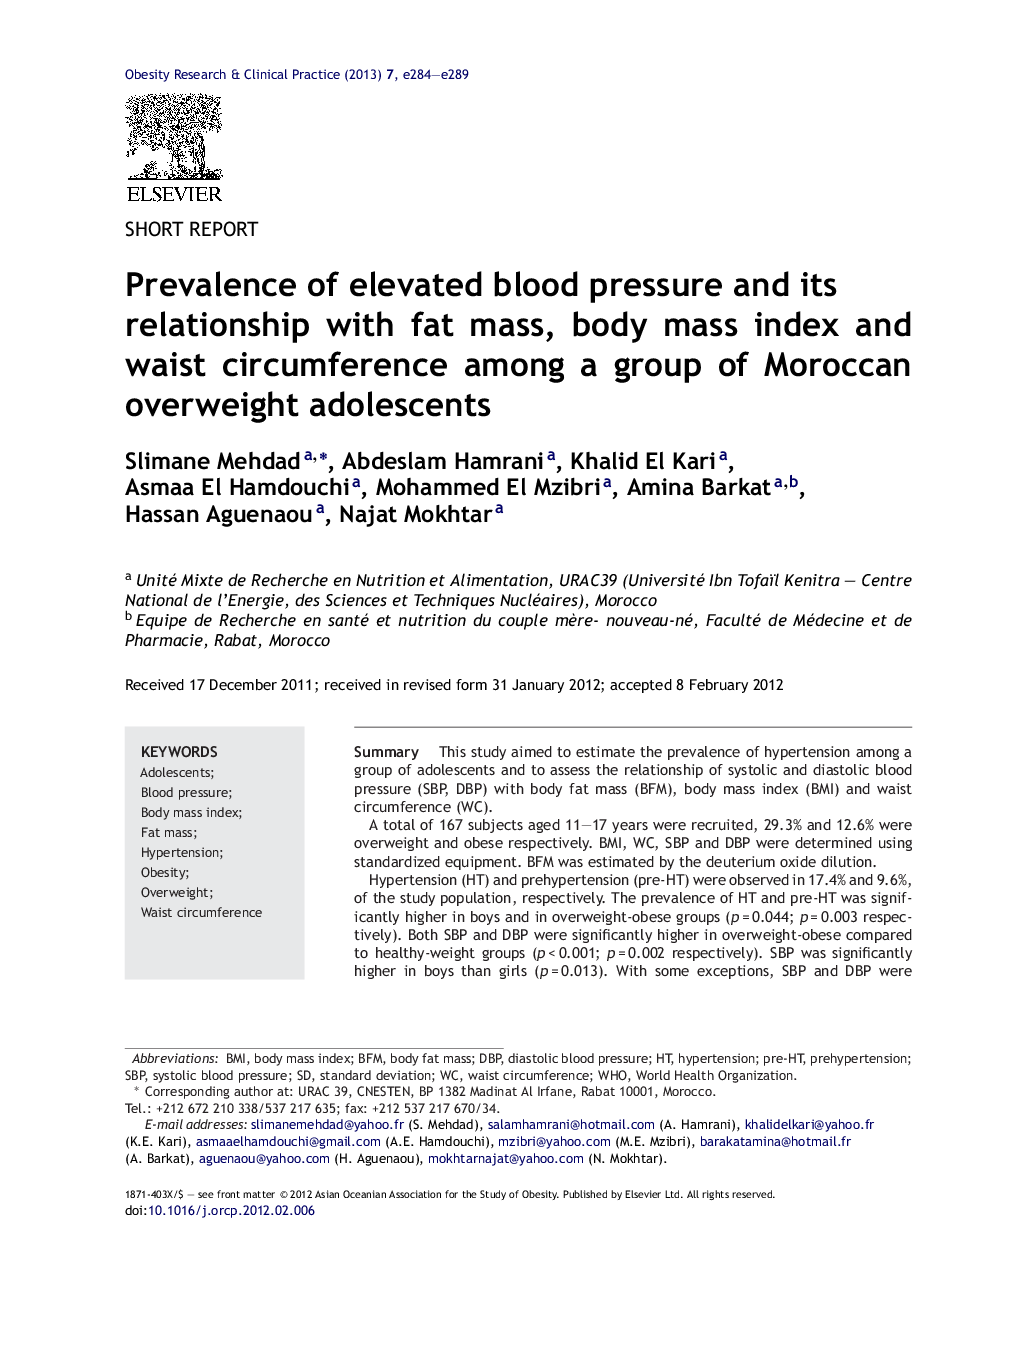 Prevalence of elevated blood pressure and its relationship with fat mass, body mass index and waist circumference among a group of Moroccan overweight adolescents